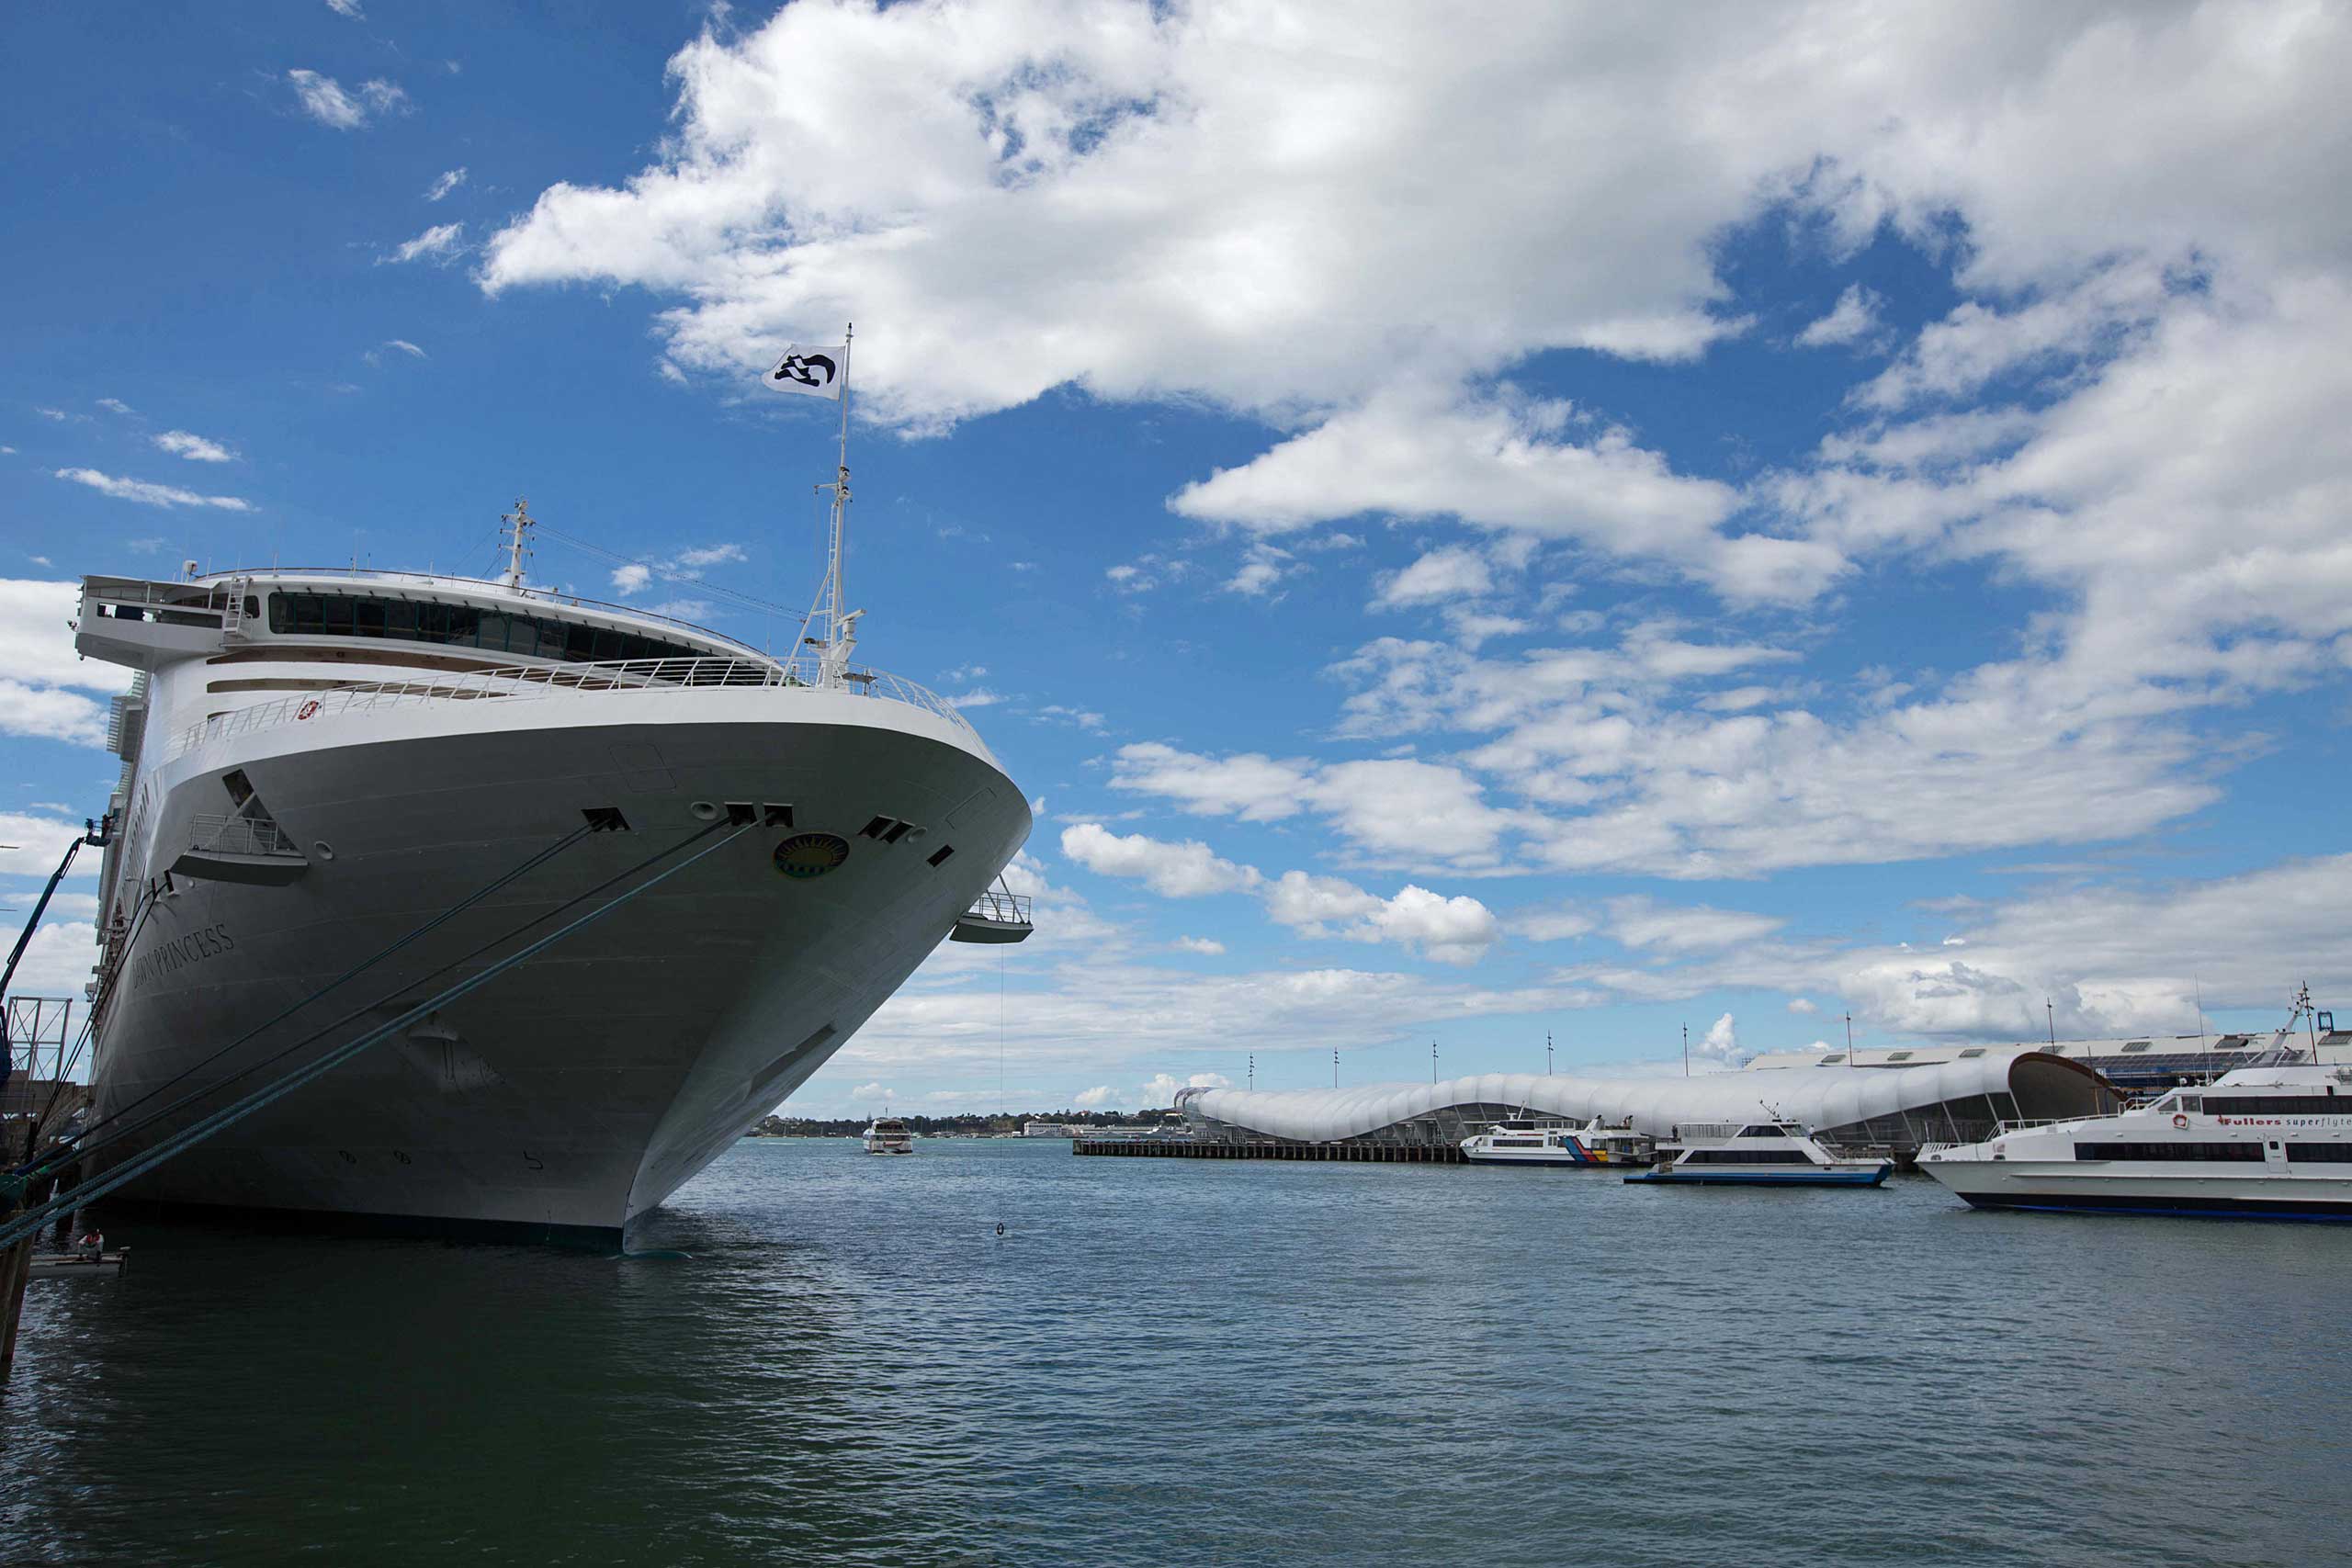 The passenger liner Dawn Princess, operated by Carnival Corp.'s Princess Cruises, sits docked at the Overseas Passenger Terminal at Princes Wharf in Auckland, New Zealand, on March 20, 2013.